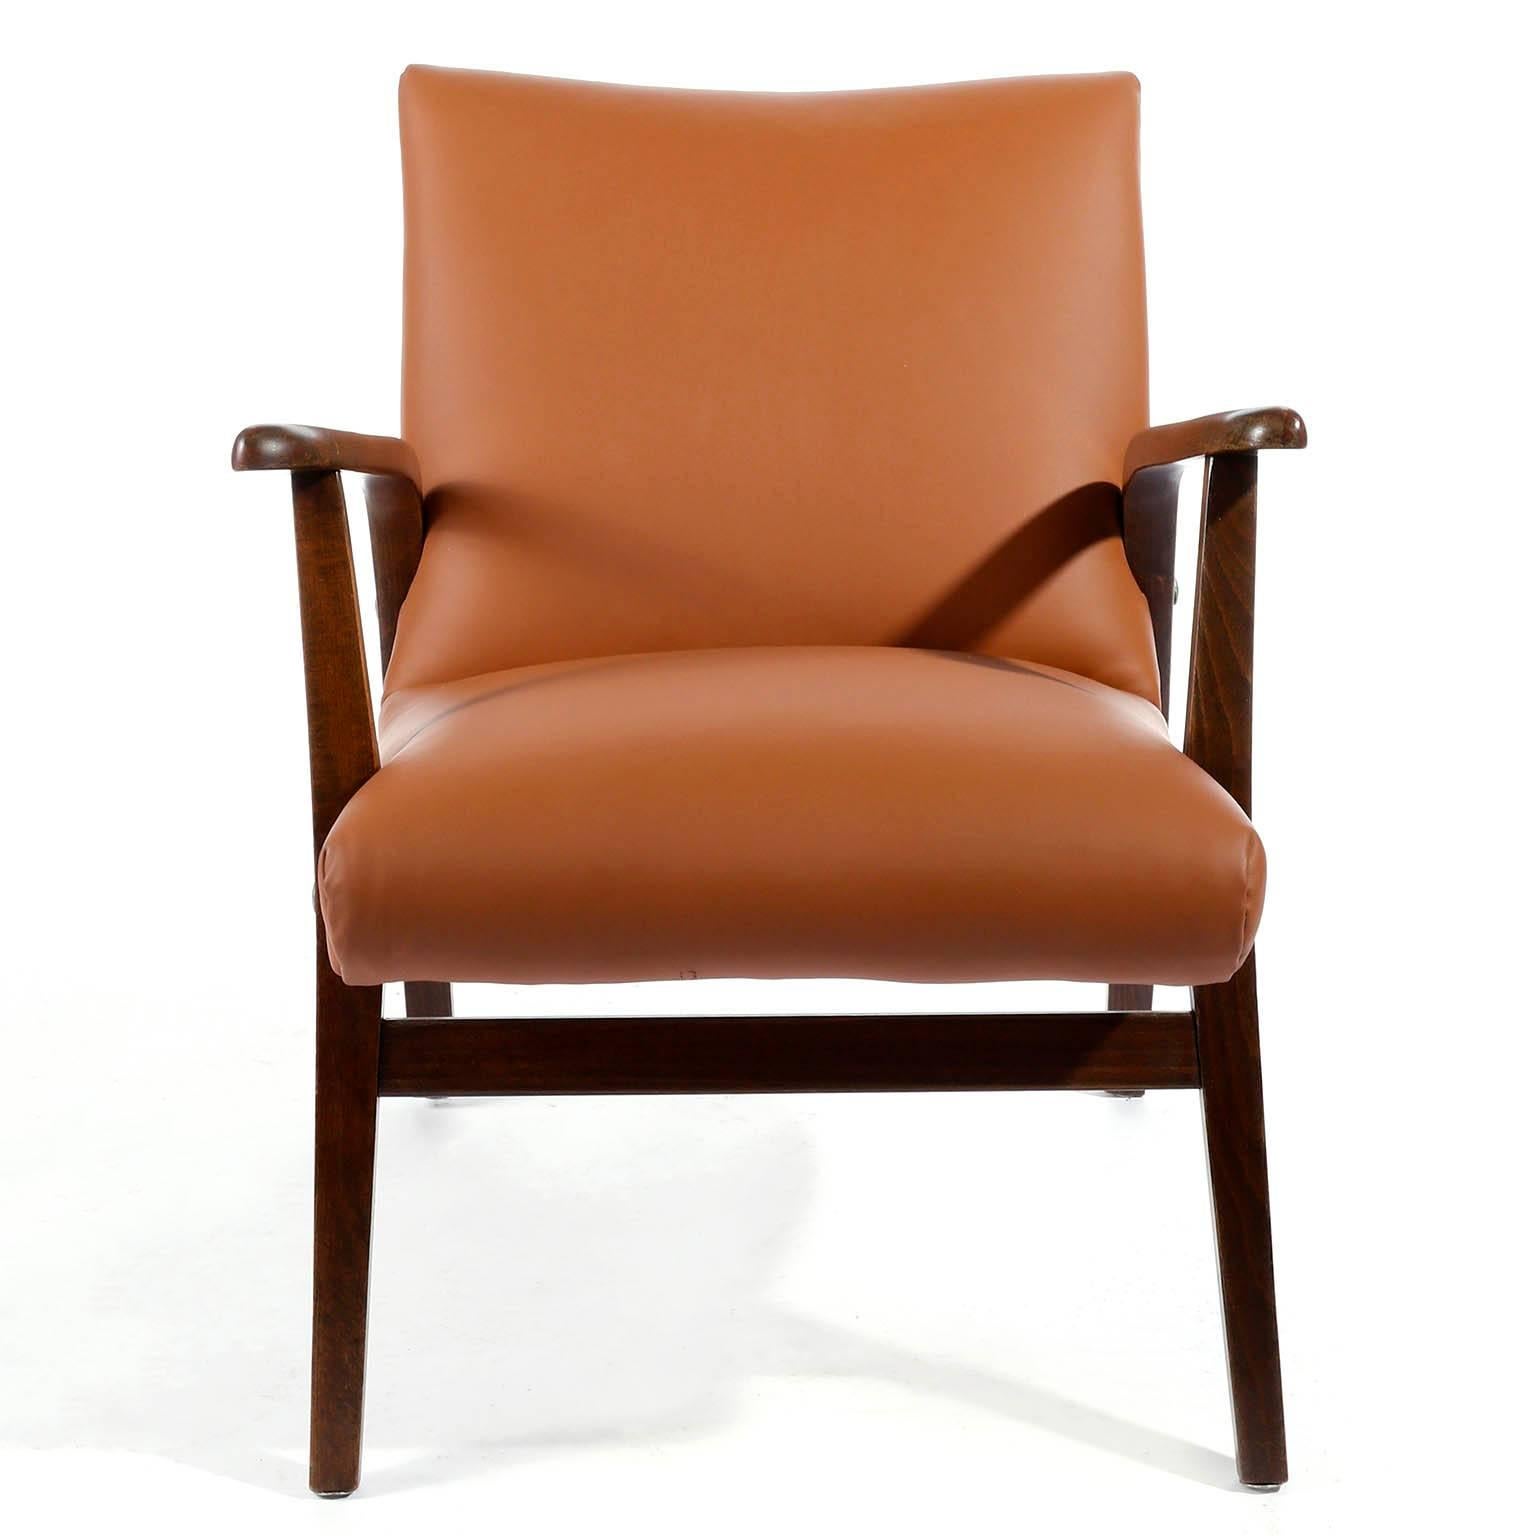 Mid-Century Modern Pair of Roland Rainer Chairs Armchairs Cafe Ritter Cognac Leather Austria, 1950s For Sale